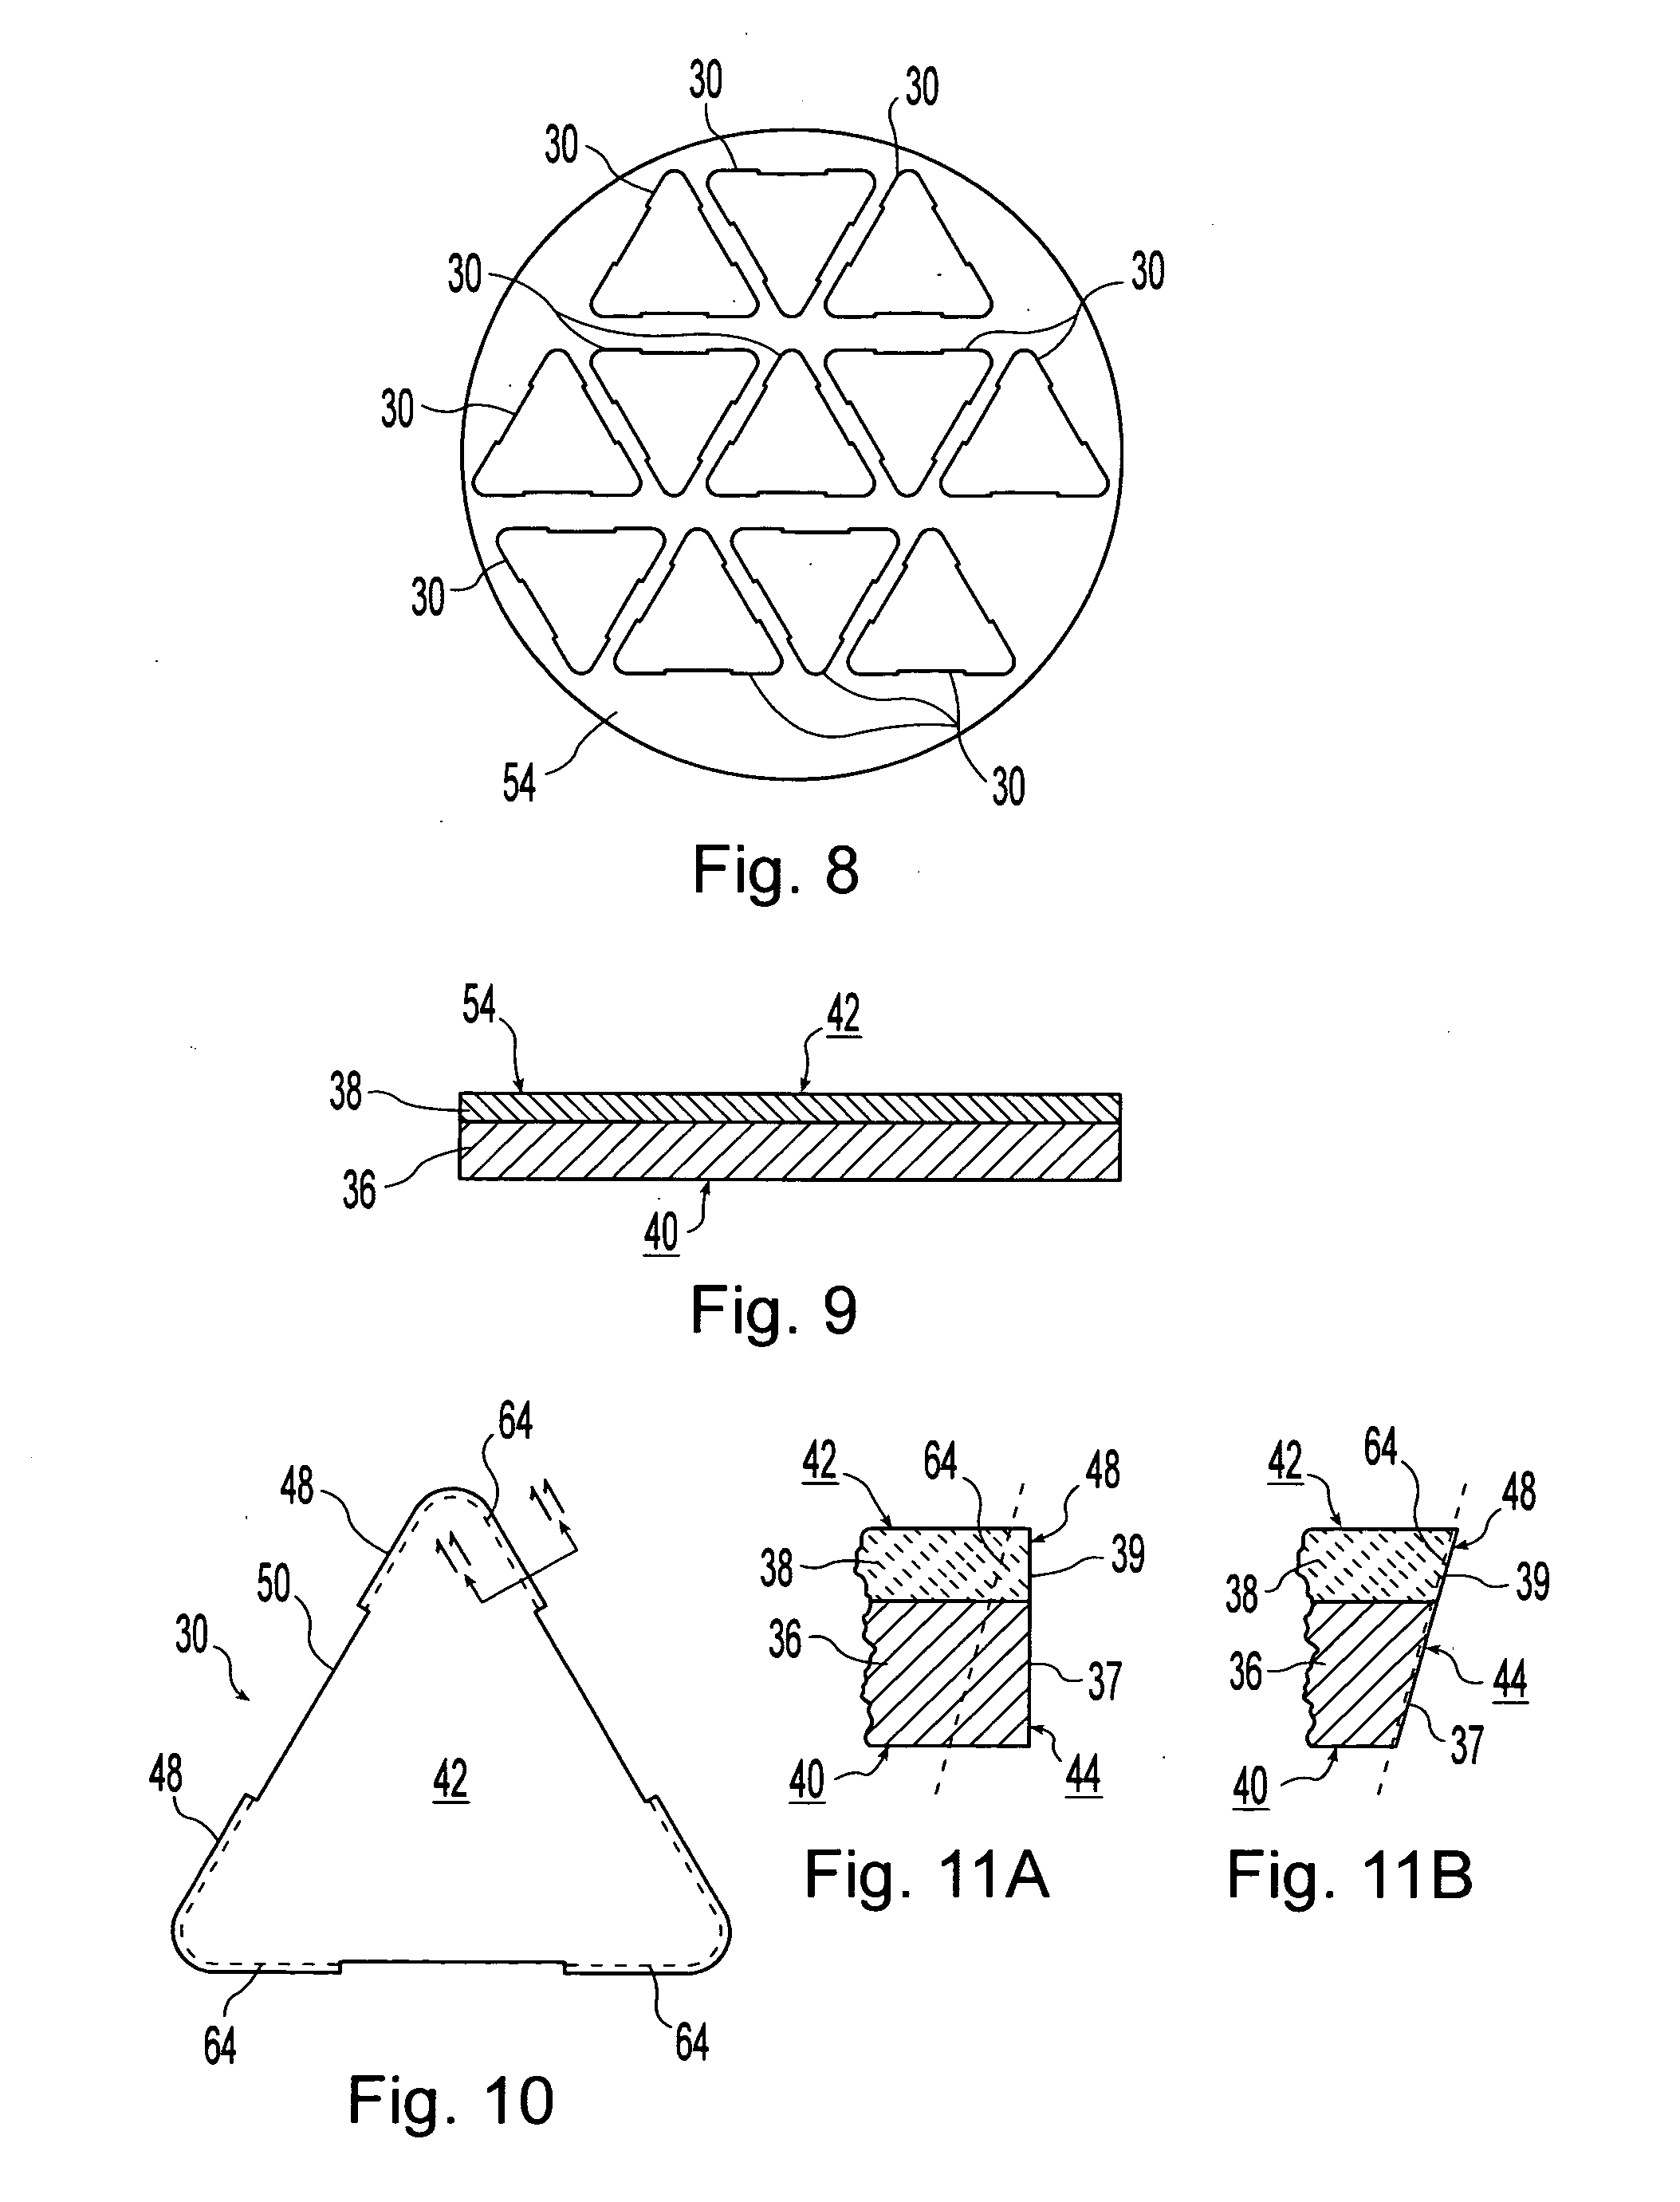 Tool insert blanks and method of manufacture